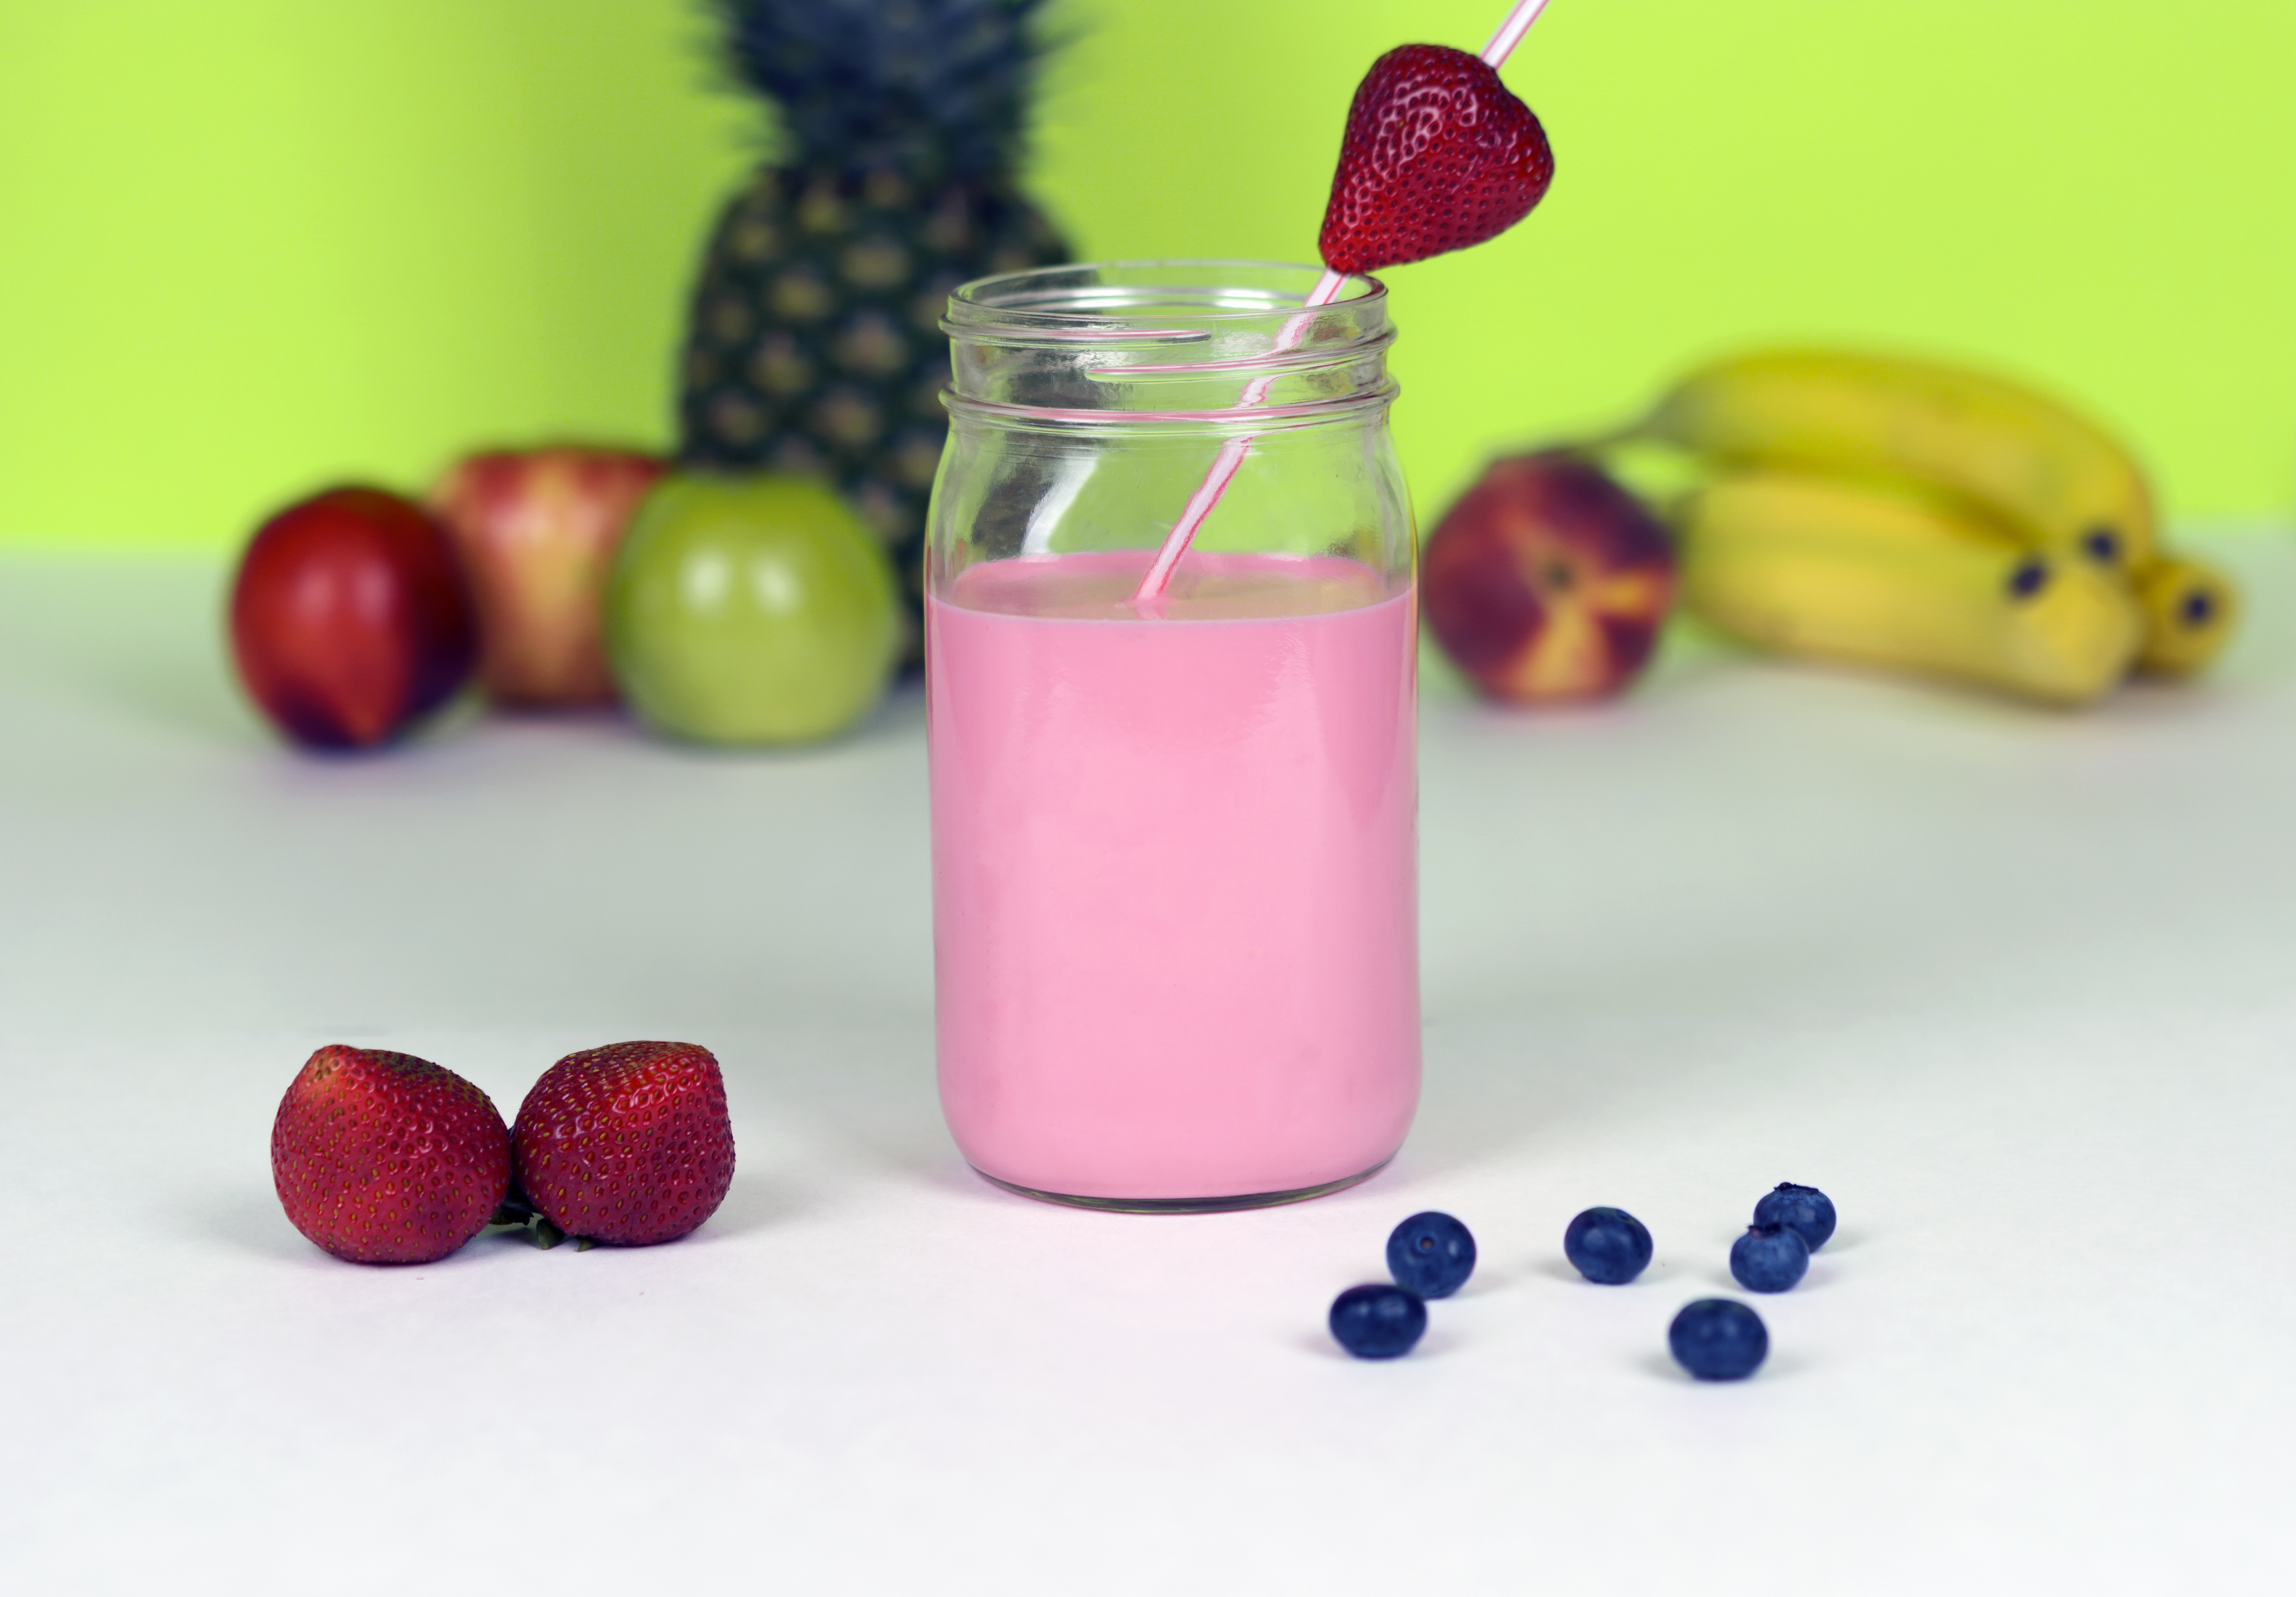 This smoothie is a tasty beverage with vitamin D-rich milk and fruits rich in many vitamins and minerals to keep our bodies strong. (Photo courtesy of Pixabay)